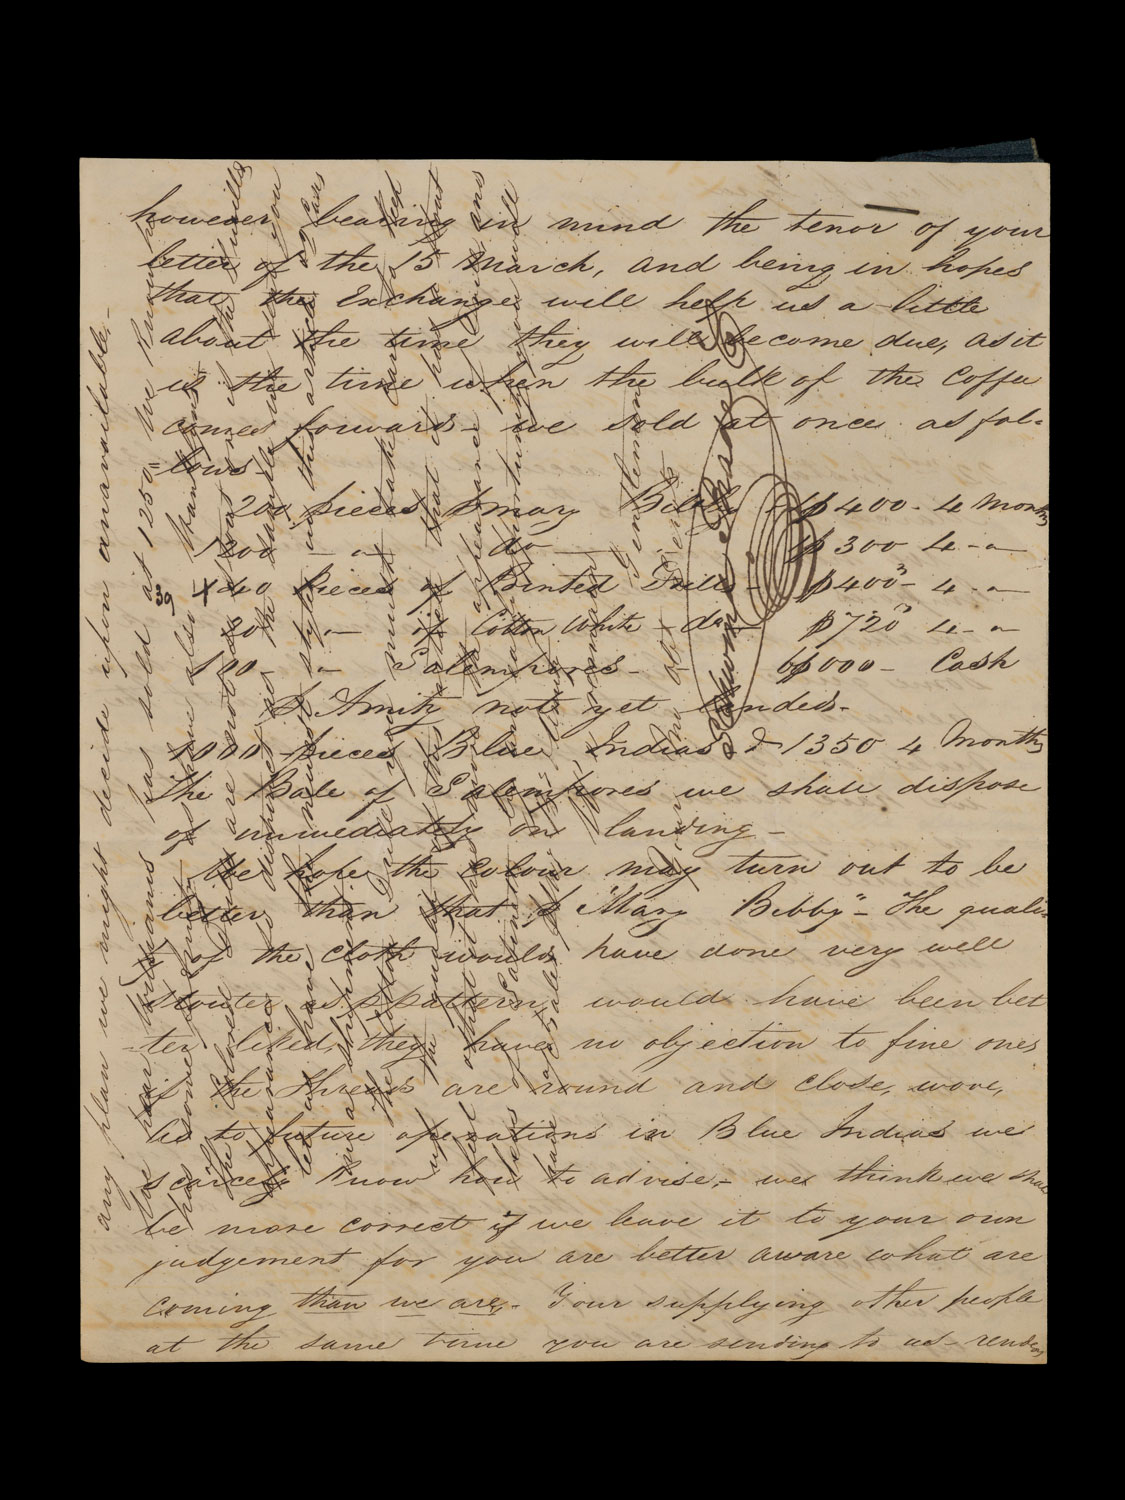 A handwritten letter from the 1830s.